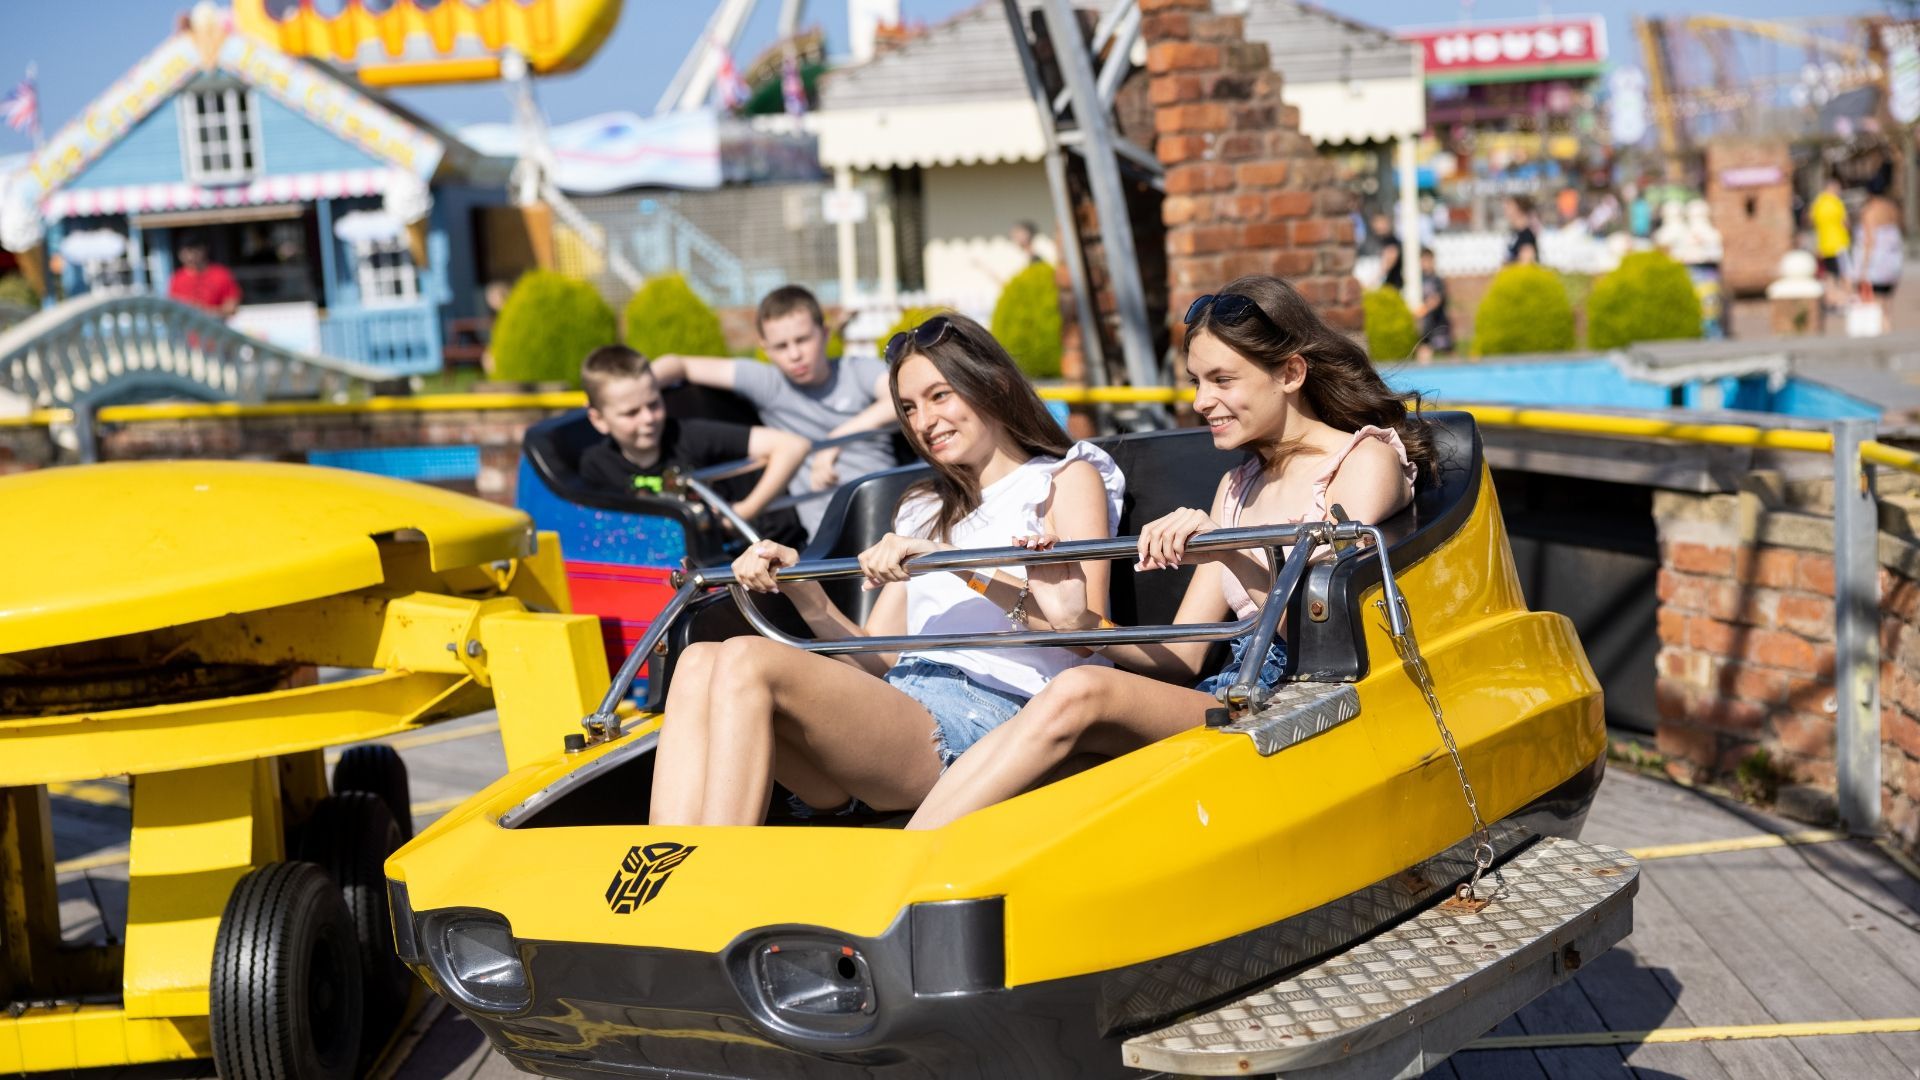 Want to enjoy theme park thrills but avoid fast and intense rides? Check out our best rides for beginners.